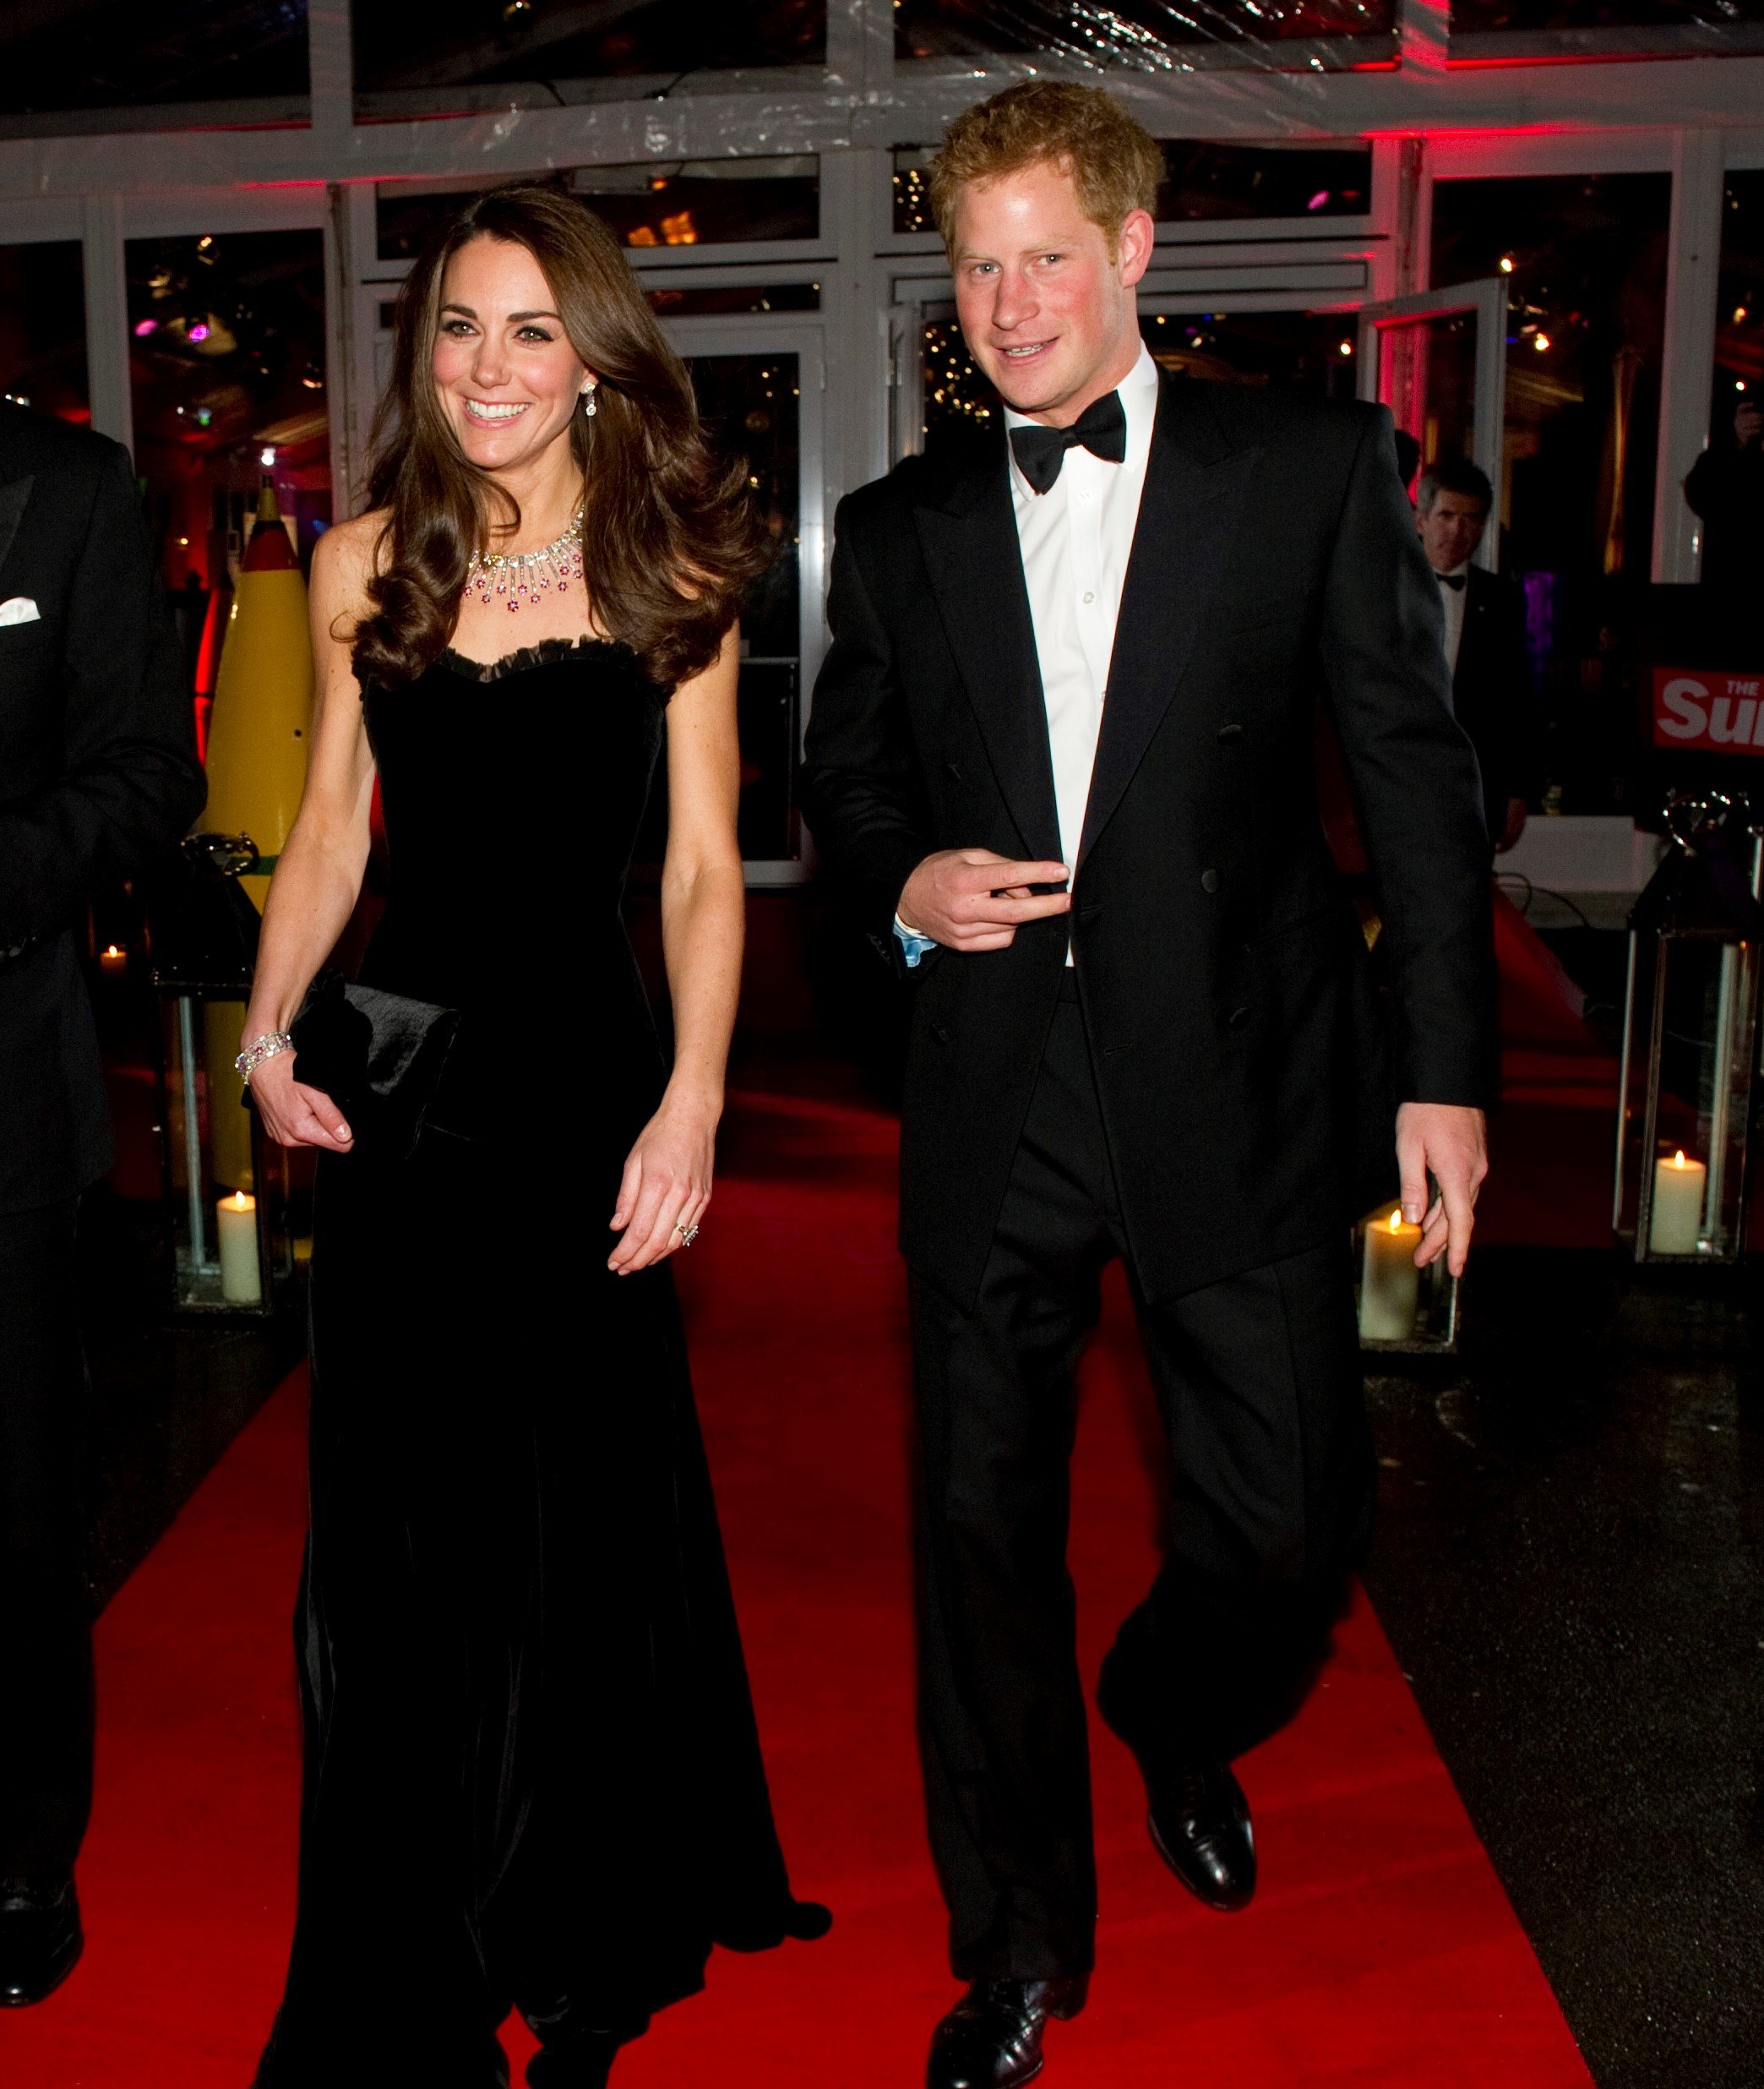 Prince Harry in a tuxedo and Kate Middleton dressed in a black gown at The Sun Military Awards in 2011